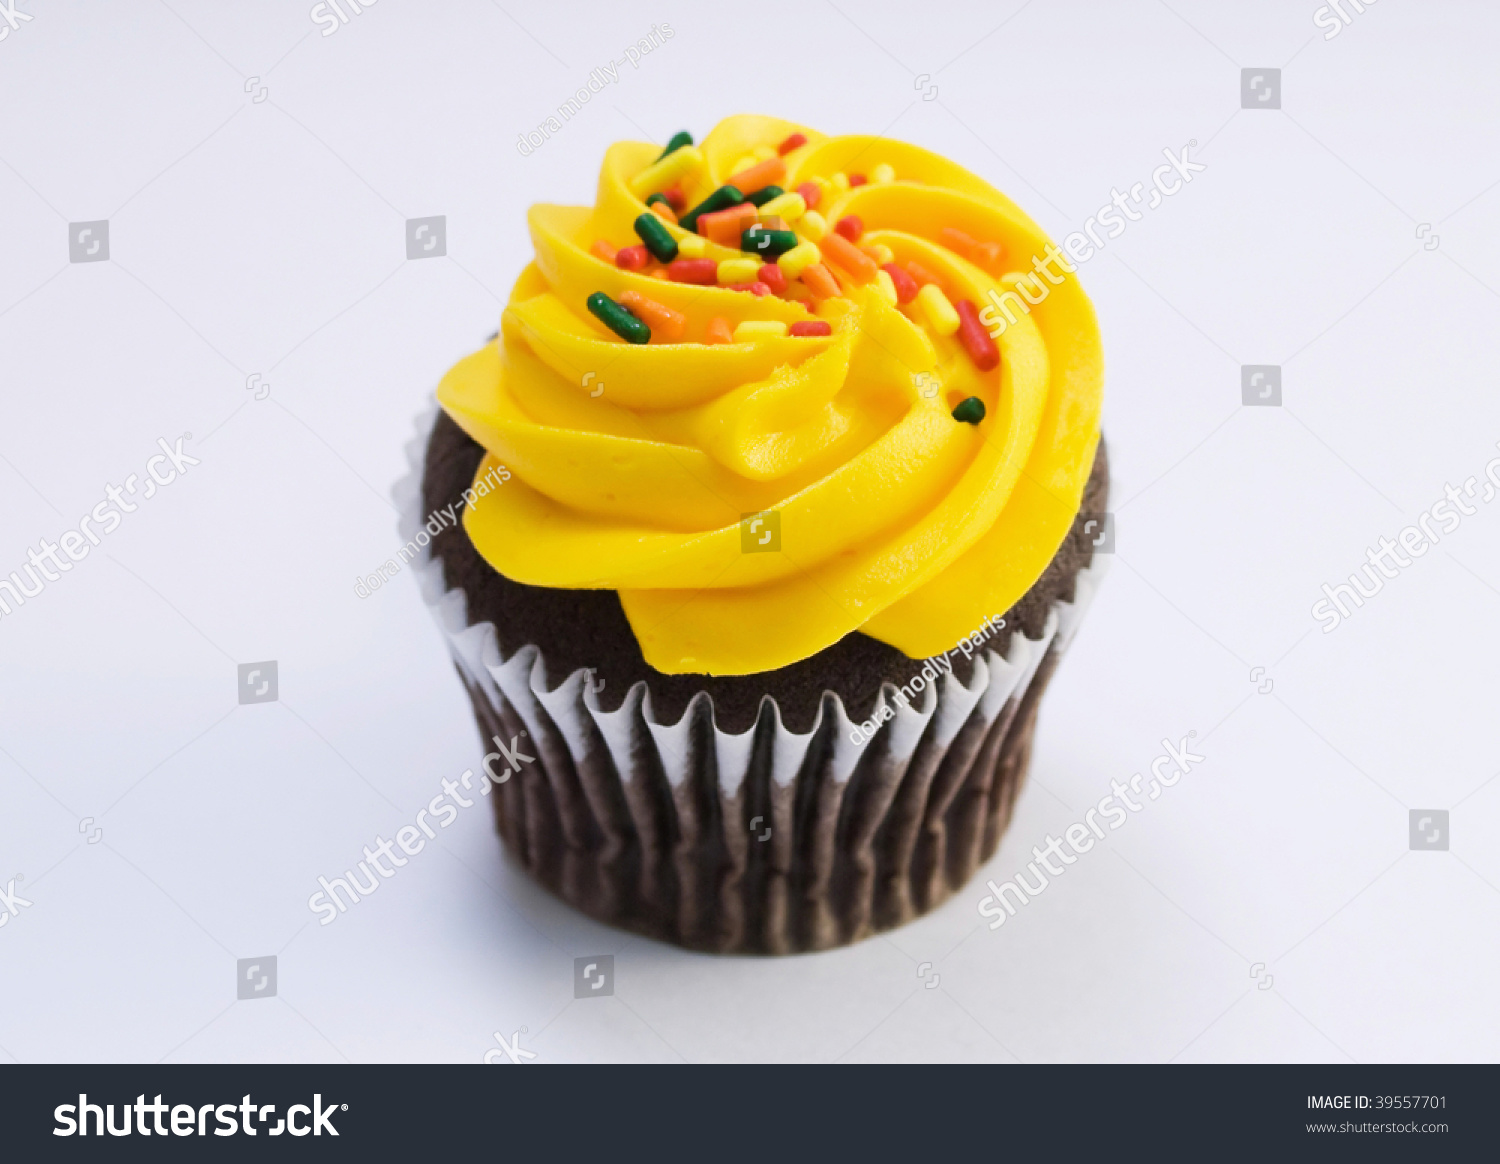 Download Chocolate Cupcake Yellow Icing Sprinkles Miscellaneous Stock Image 39557701 PSD Mockup Templates